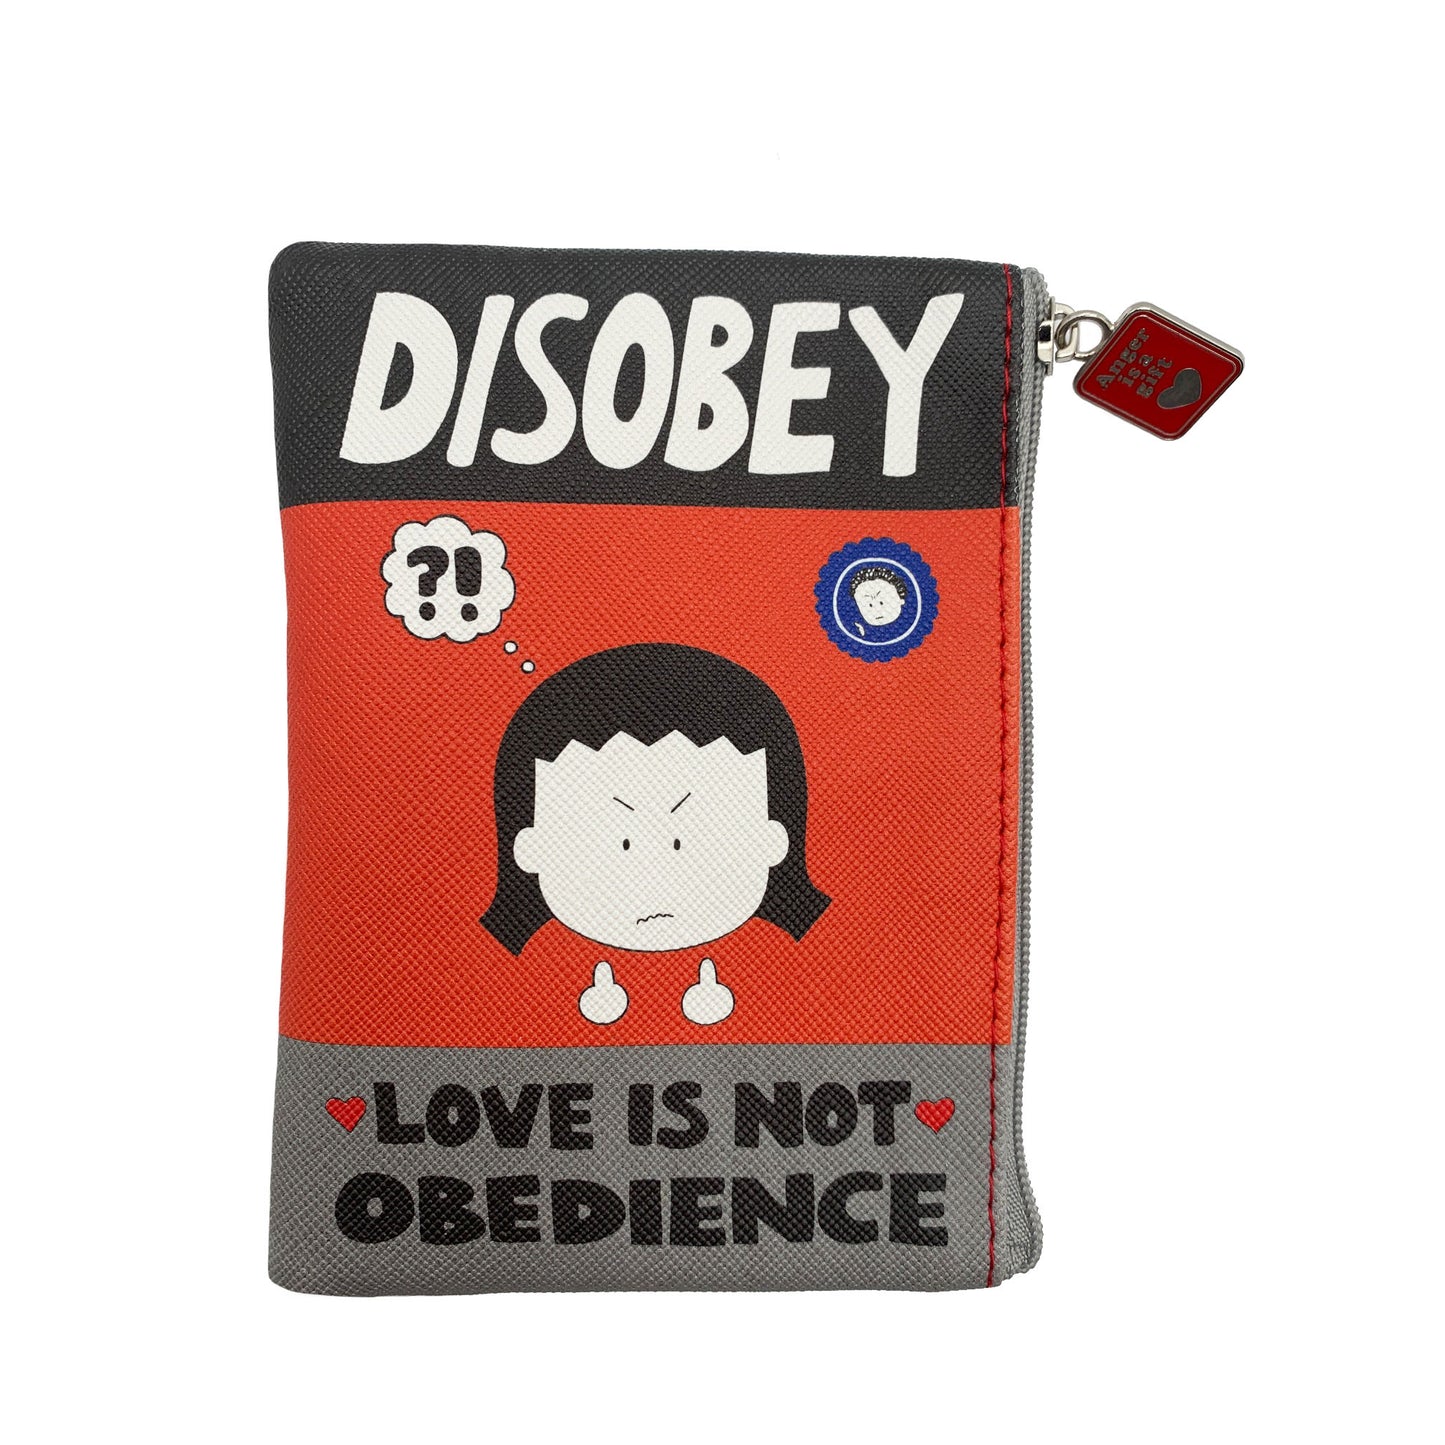 "Disobey Love is Not Obedience" coin bag